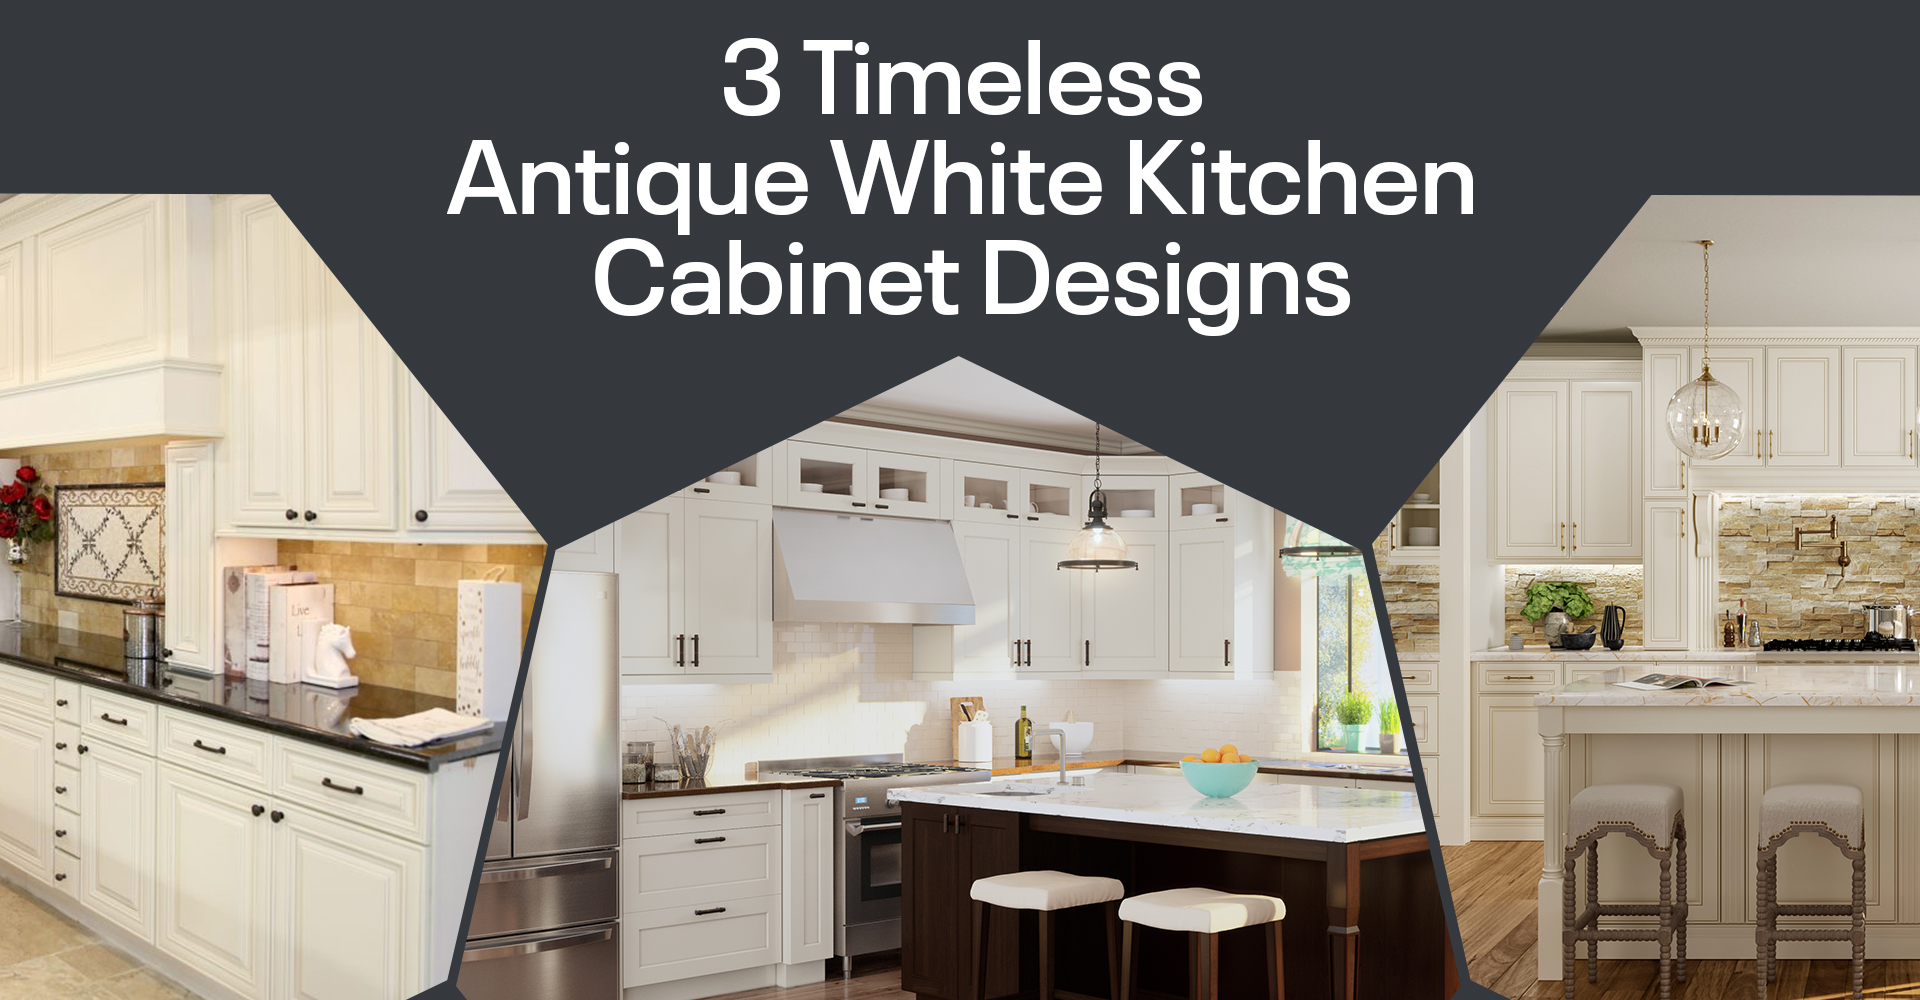 15 Kitchen Countertop Cabinet Ideas Guaranteed to Add Old-World